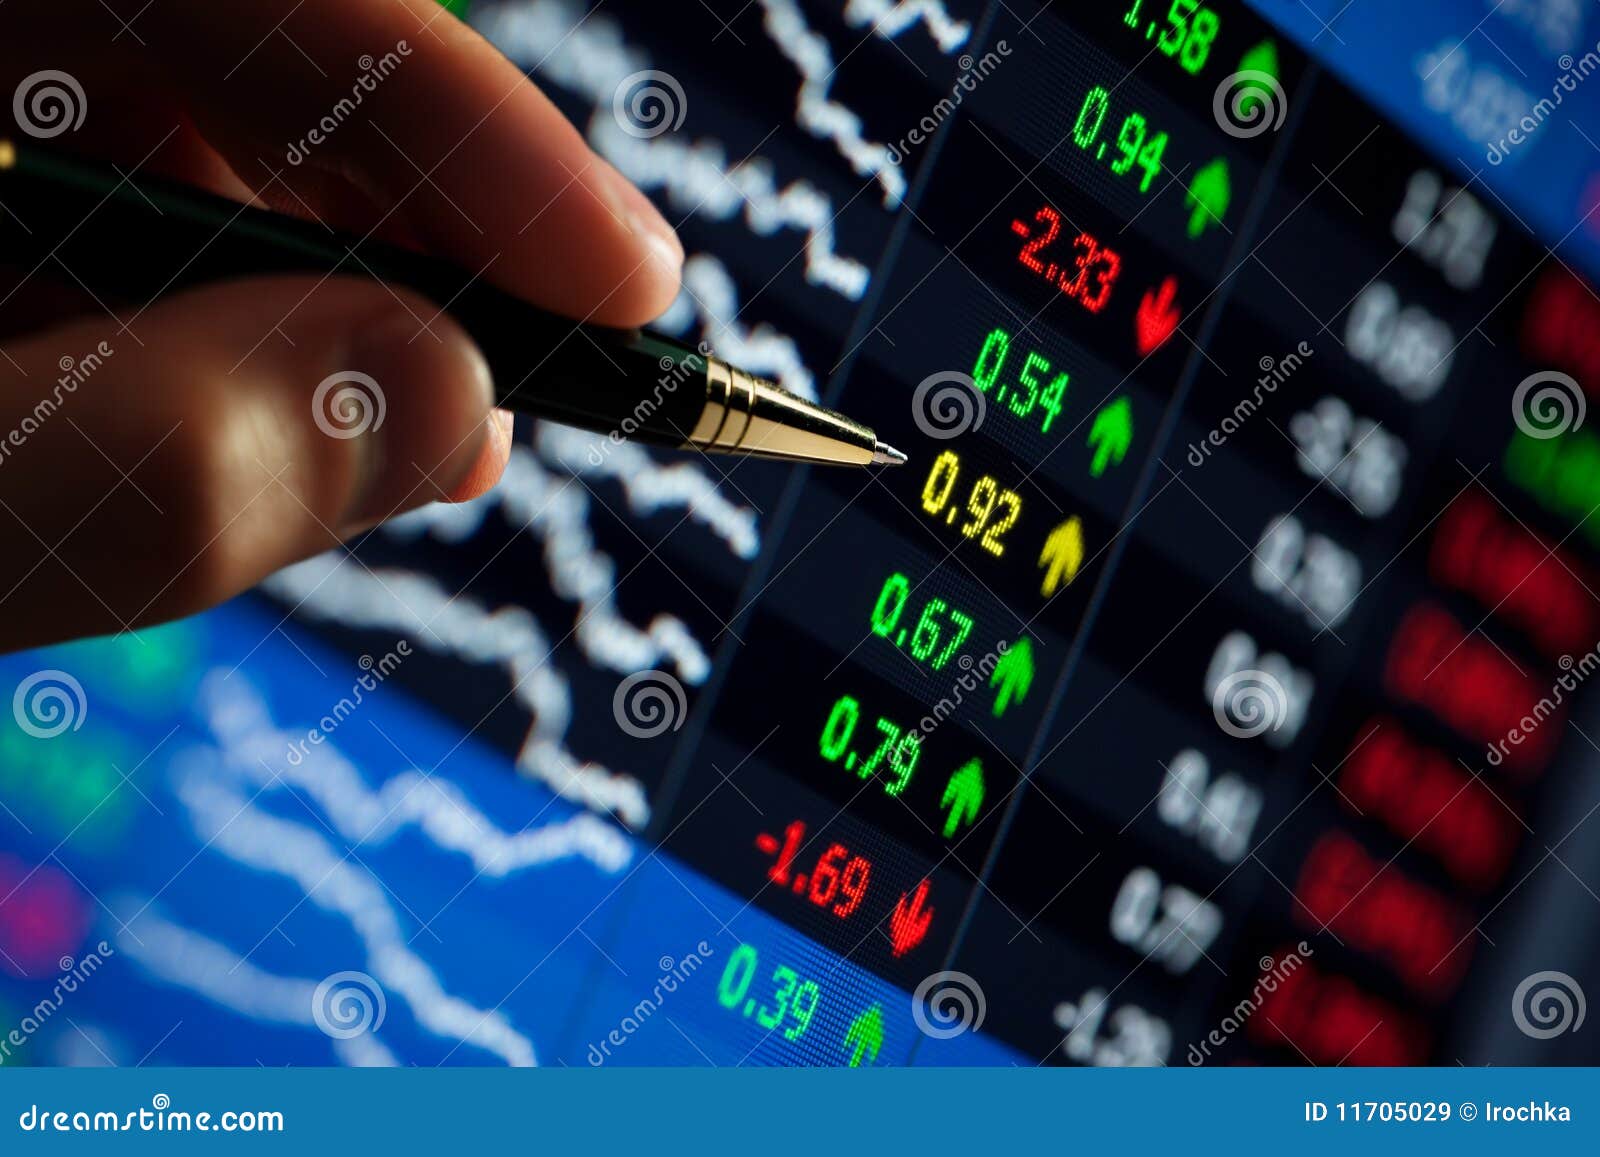 pen pointing at stock prices